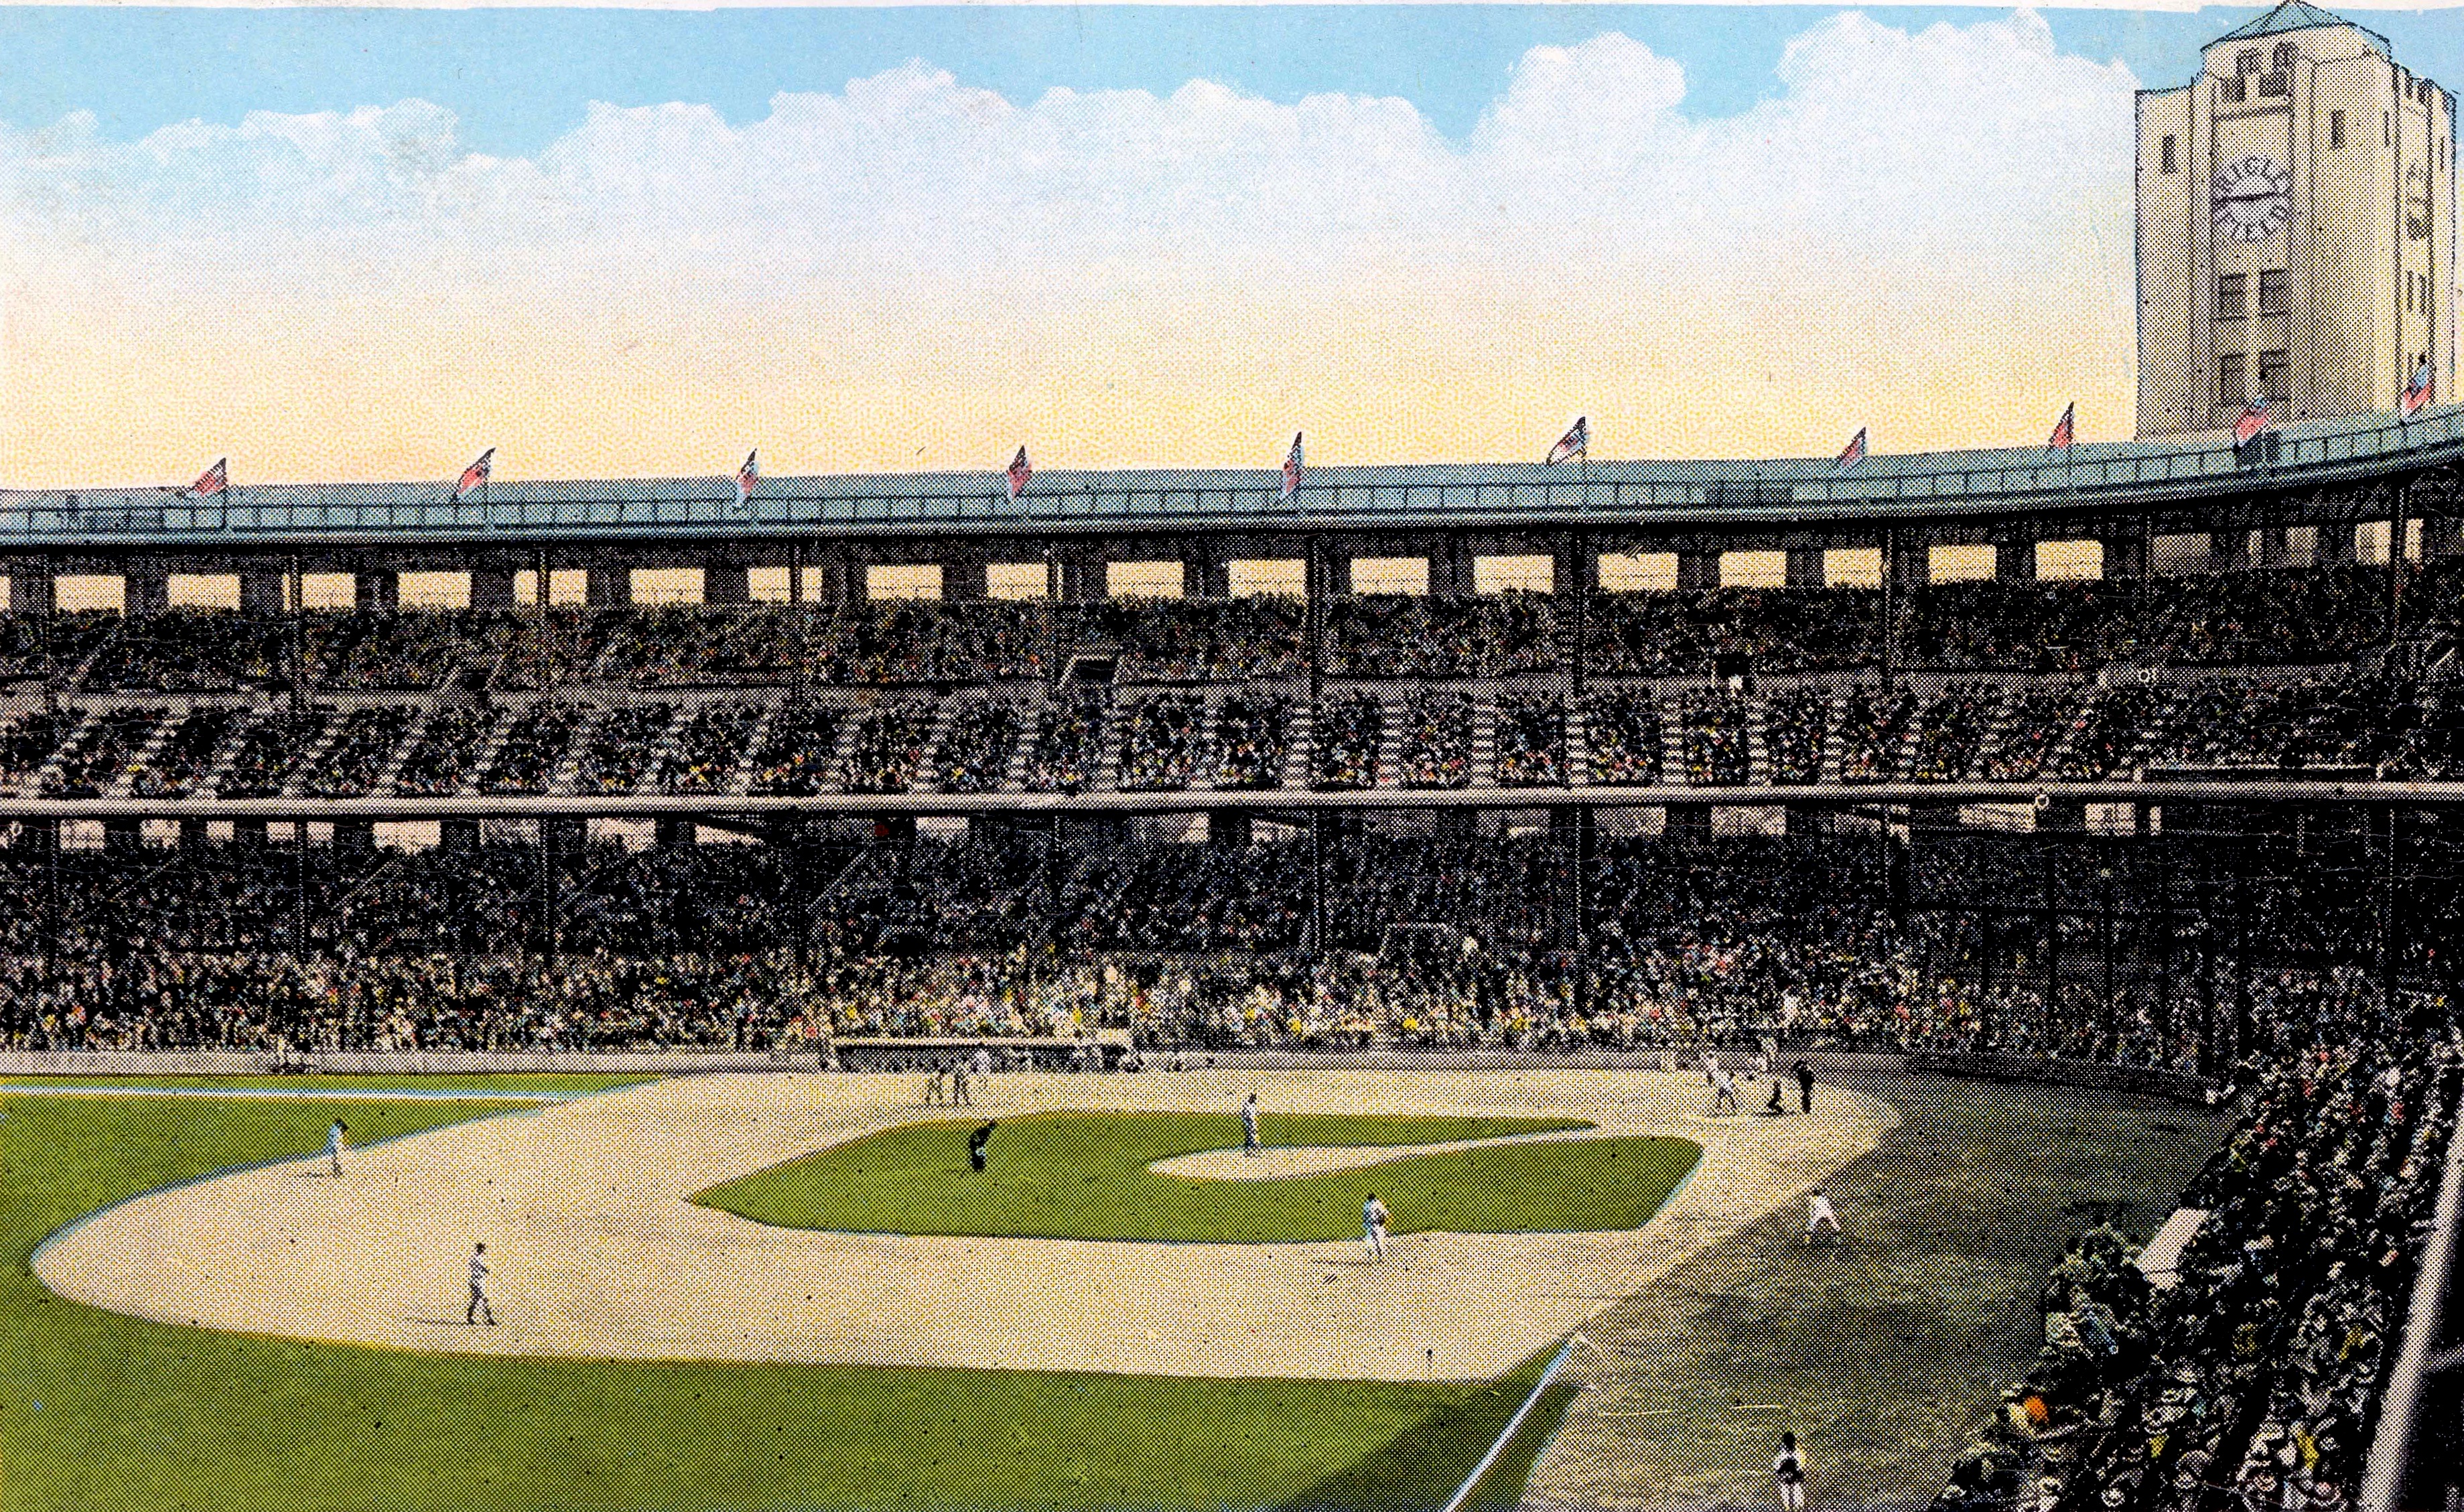 Baseball Way Back: Meet the architect of Comiskey Park and Wrigley Field